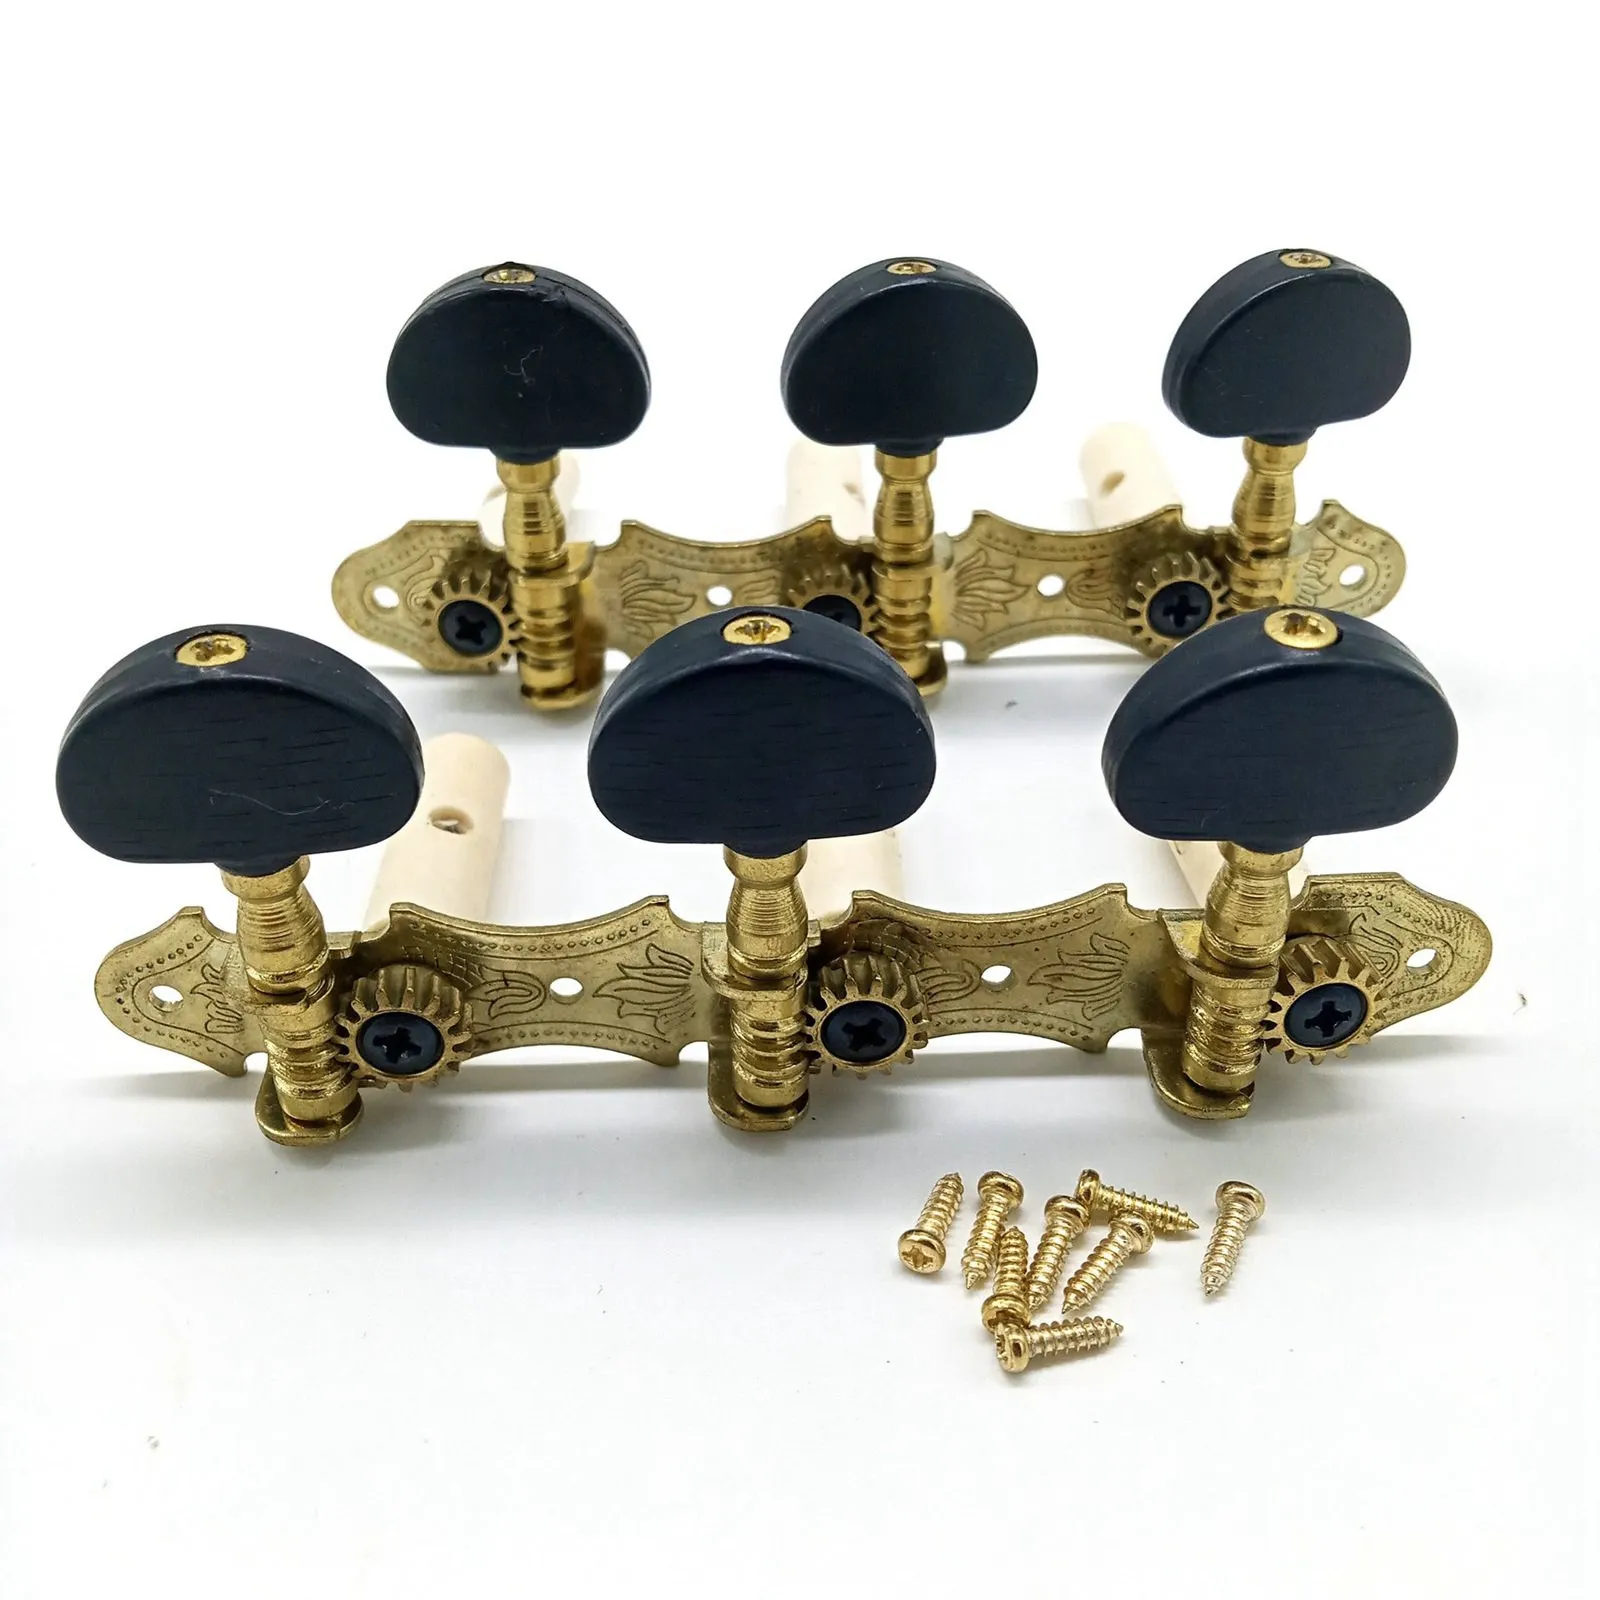 

Left Right Classical Guitar String Tuning Pegs Machine Heads Tuners Keys 3L3R Professional Guitar Accessories,Black